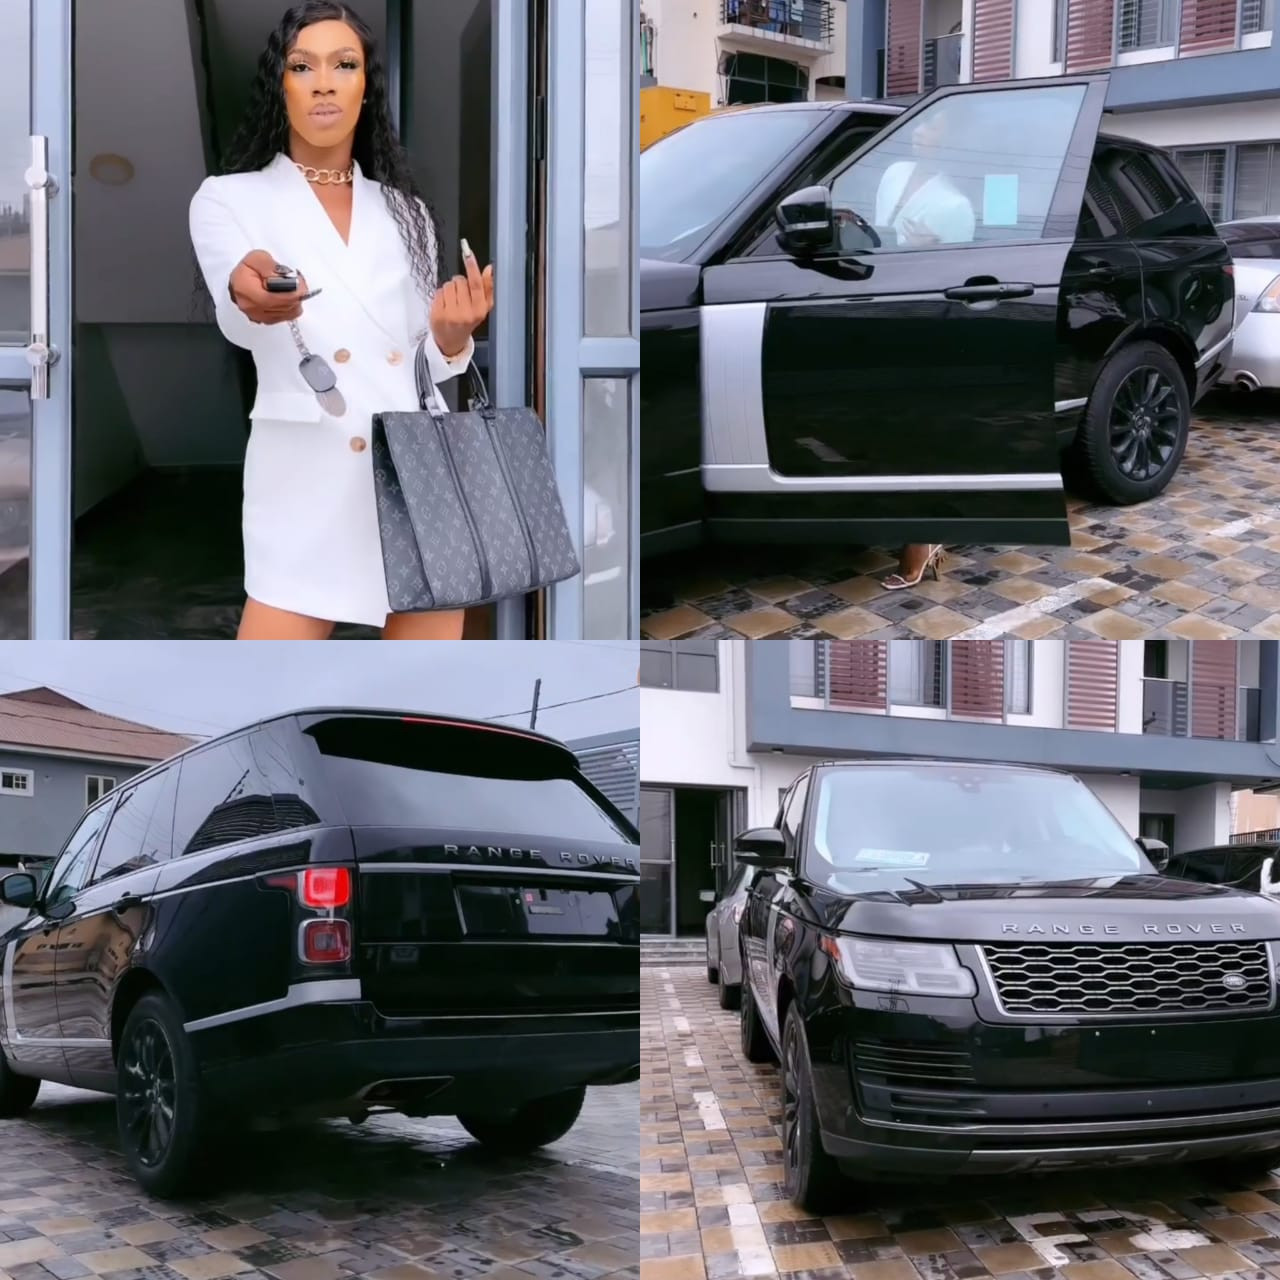 Crossdresser, James Brown Calebrates With Friends After Buying Himself A Range Rover Car (Video)